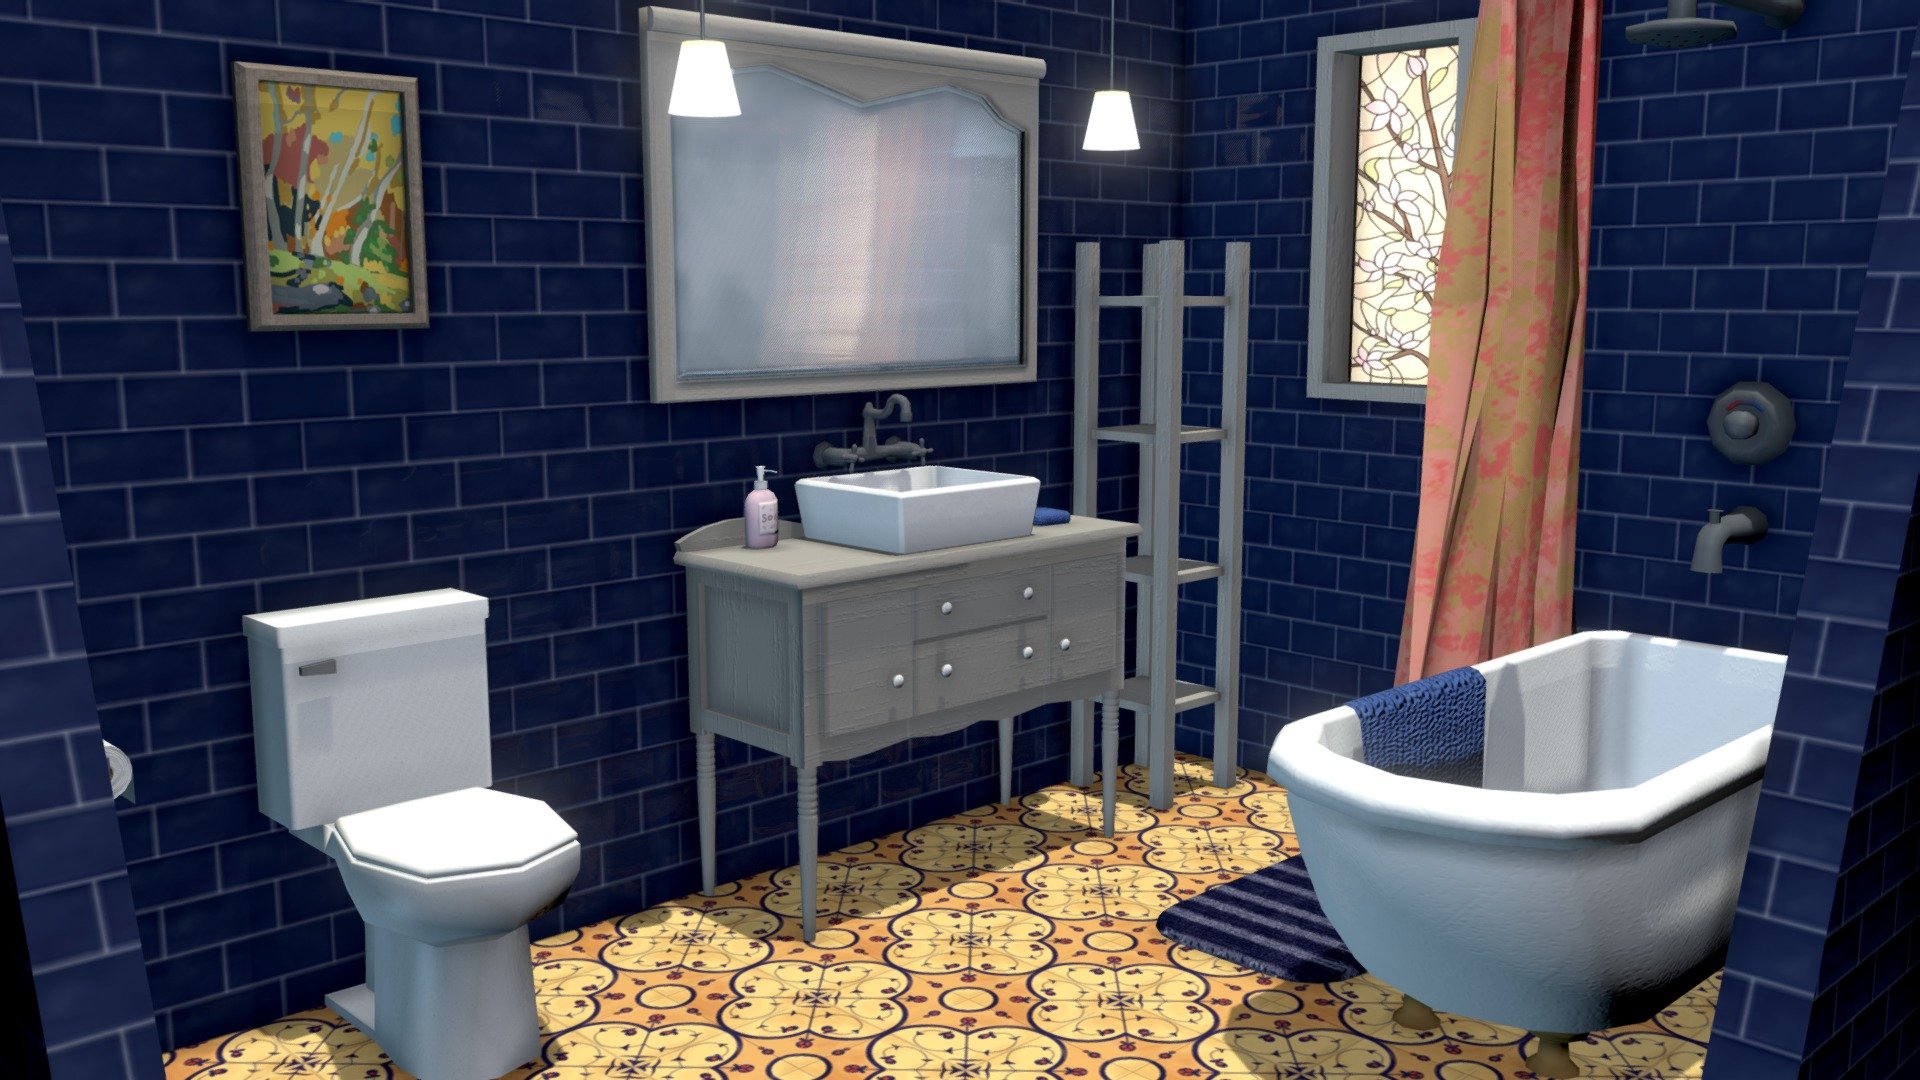 A nice and vibrant bathroom indeed. Comes with extra-soft toilet paper pre-installed! Made in maya2019, textured in photoshop 3d model